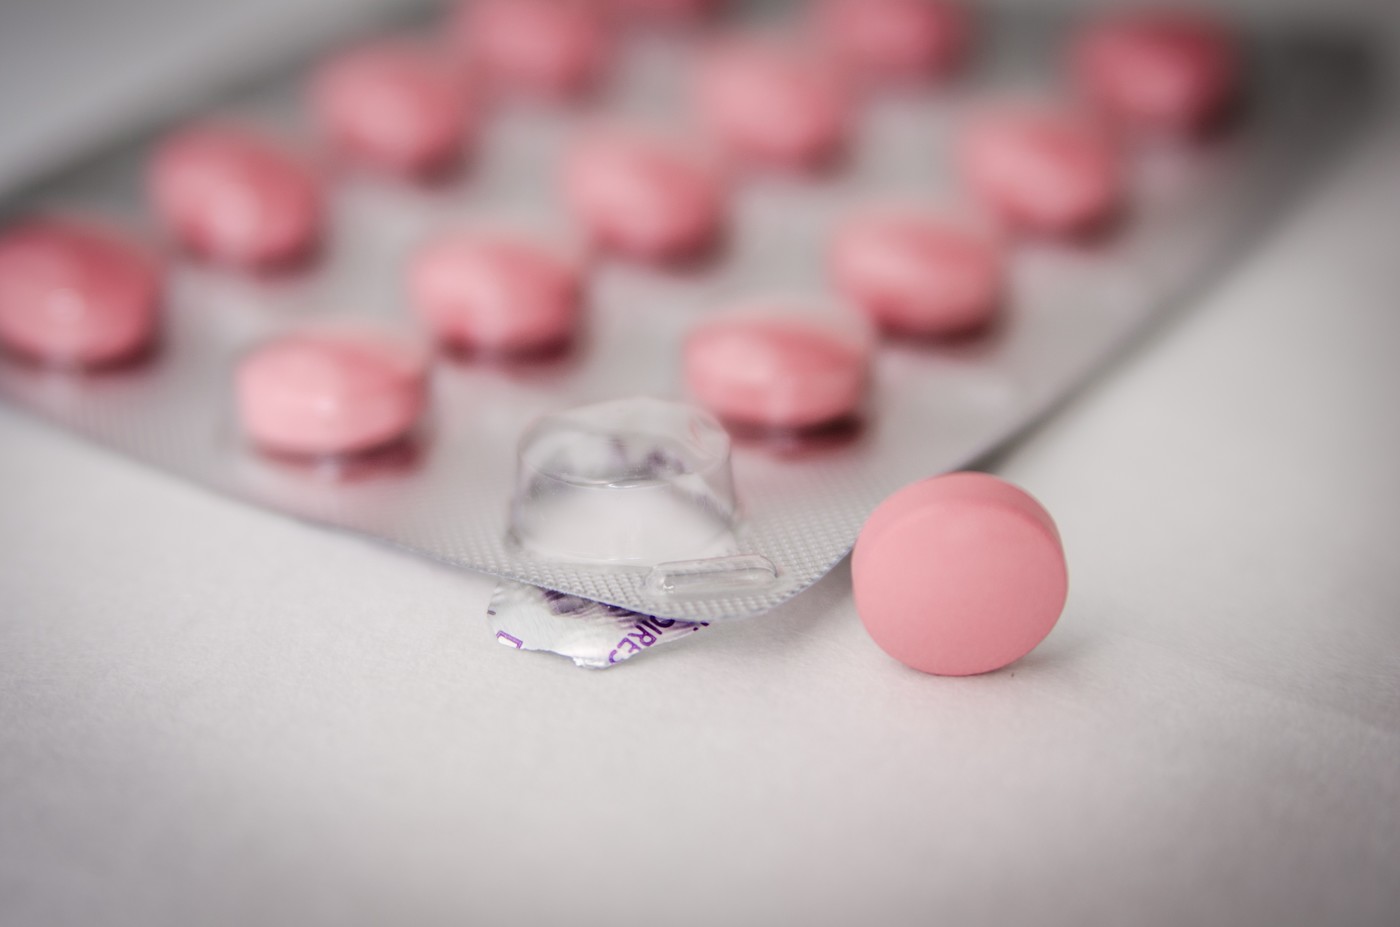 “We’re ecstatic”: Breast Cancer Foundation responds to new drug funding announcement